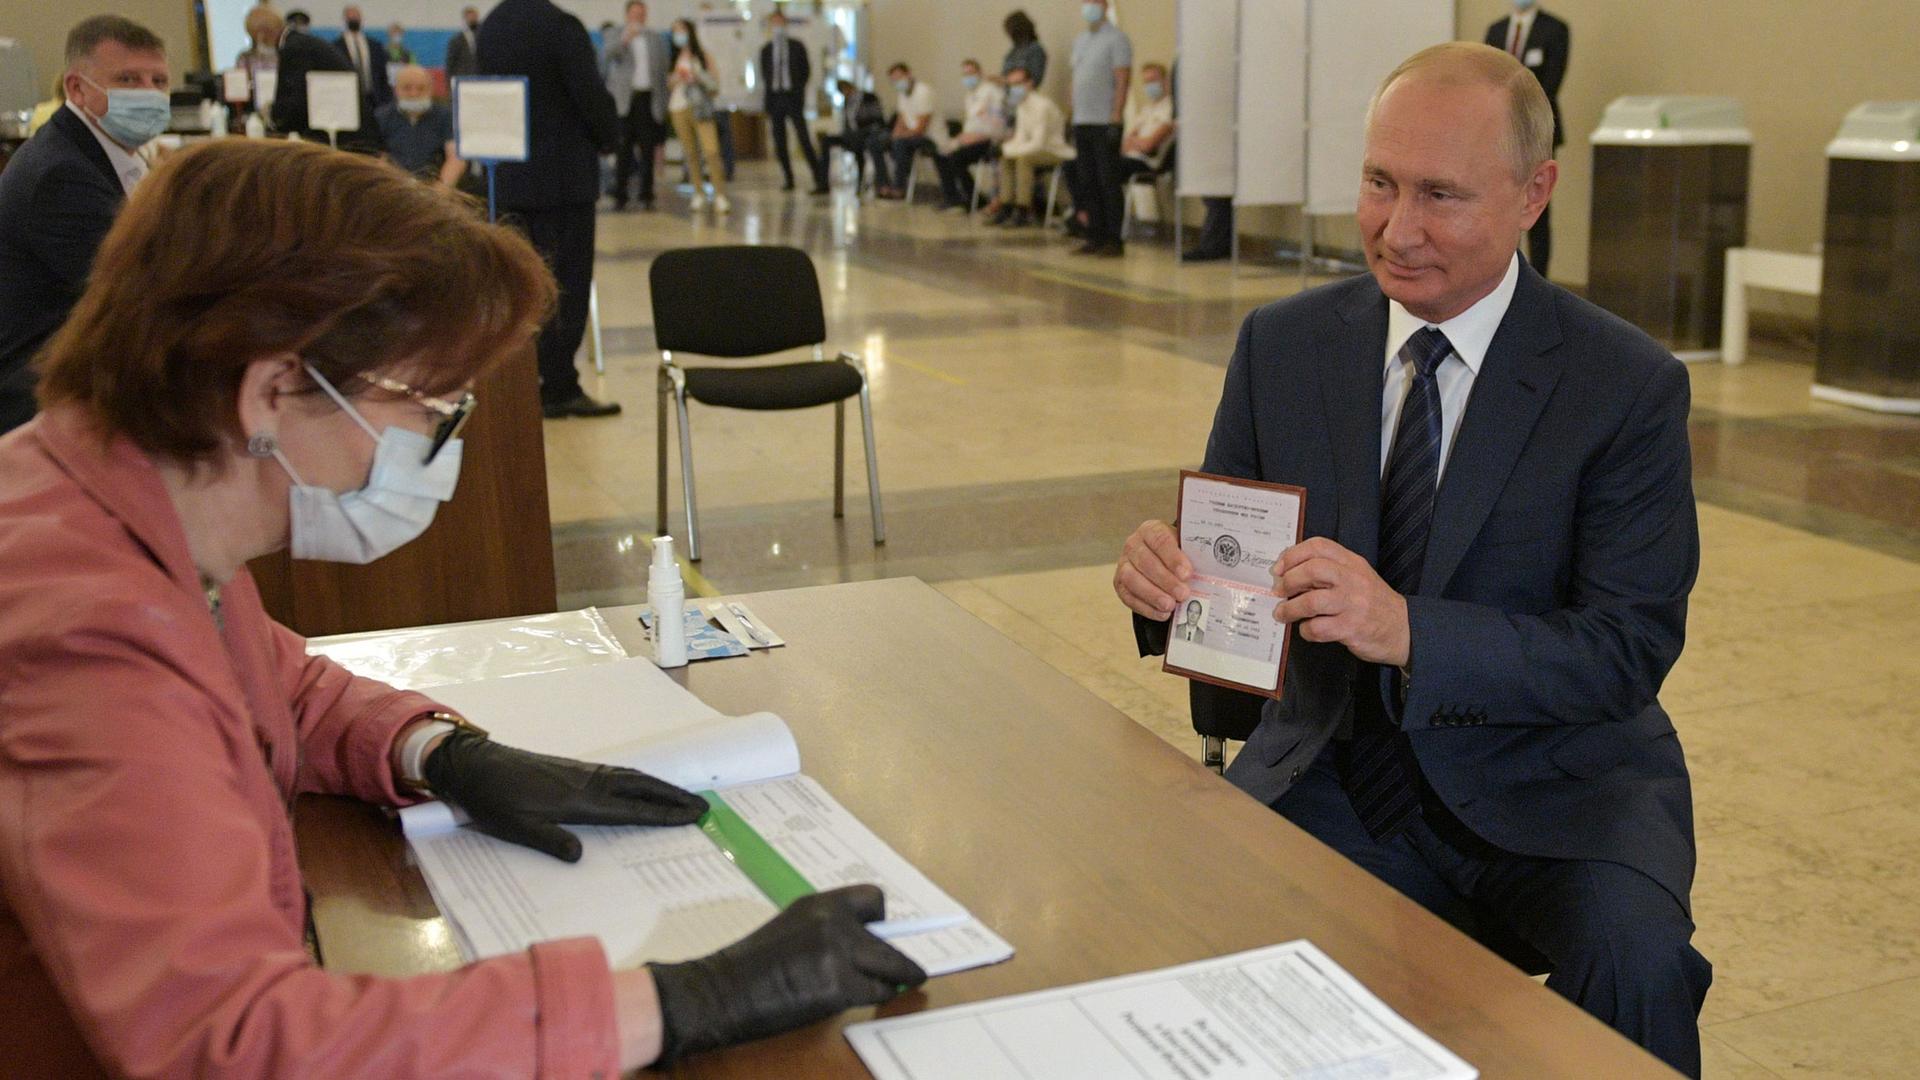 Putin holds his passport in front of an election official 